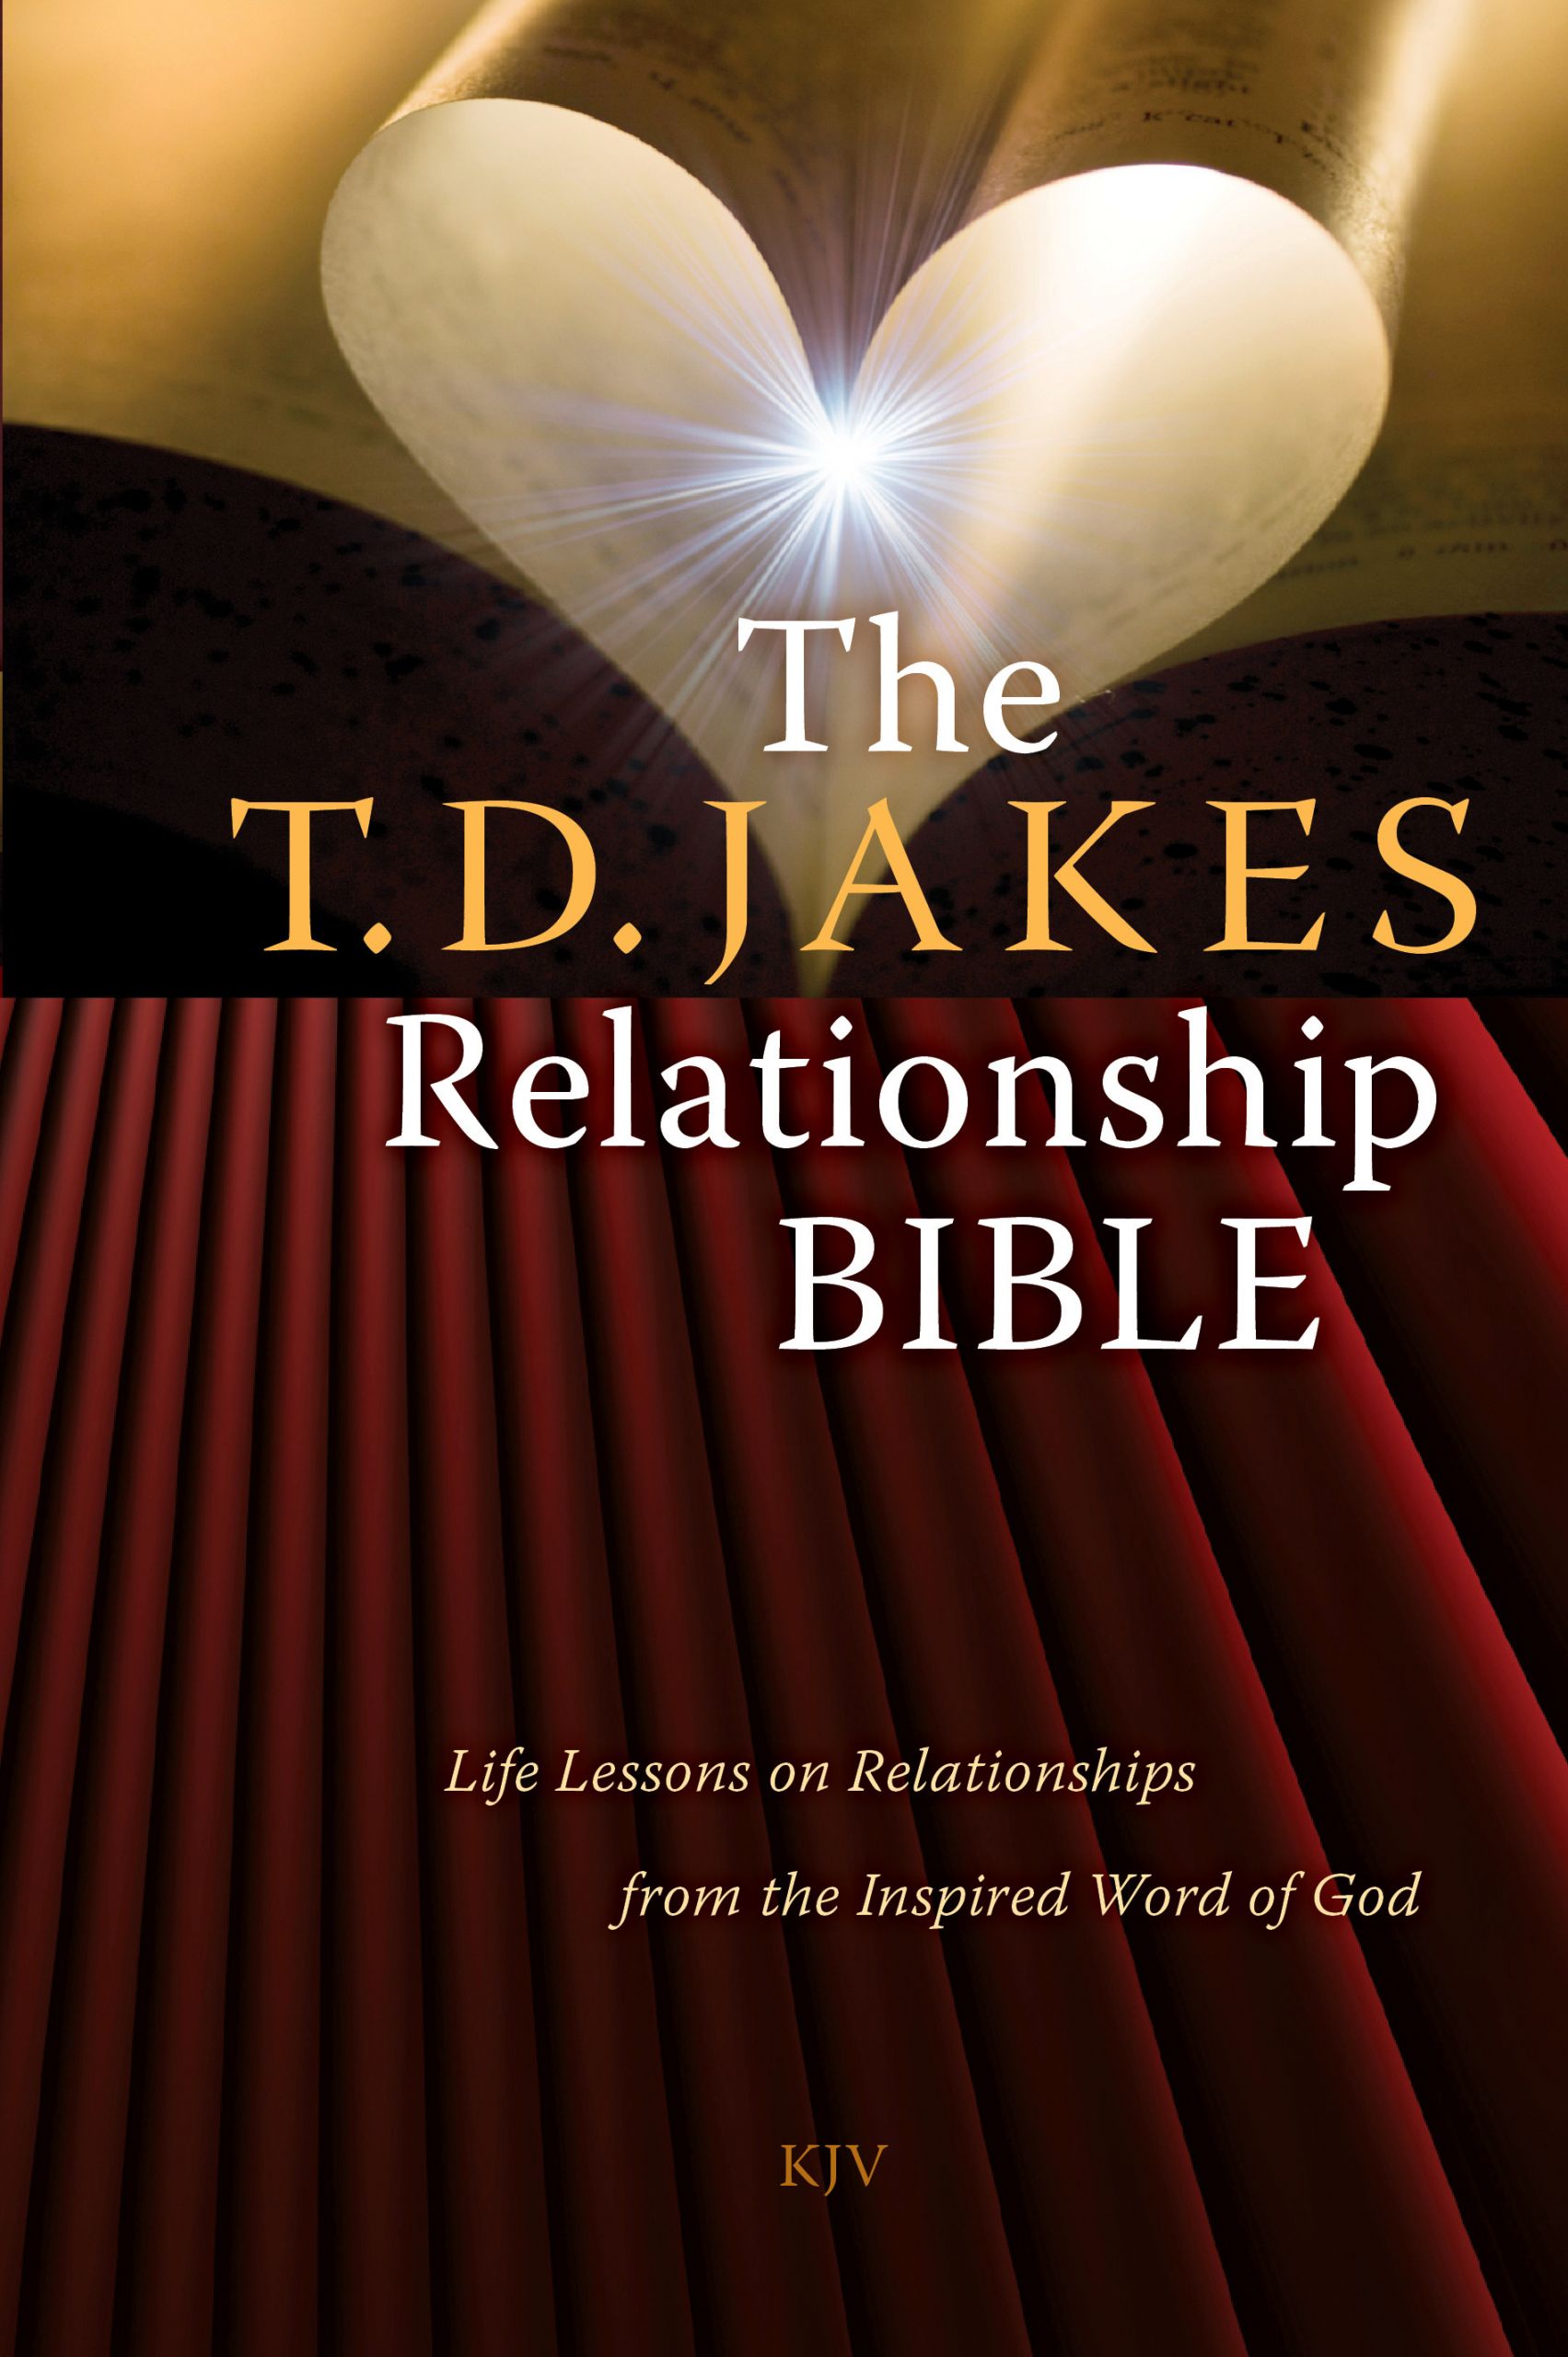 T.D Jakes Quotes On Relationships
 Td Jakes Quotes Relationships QuotesGram